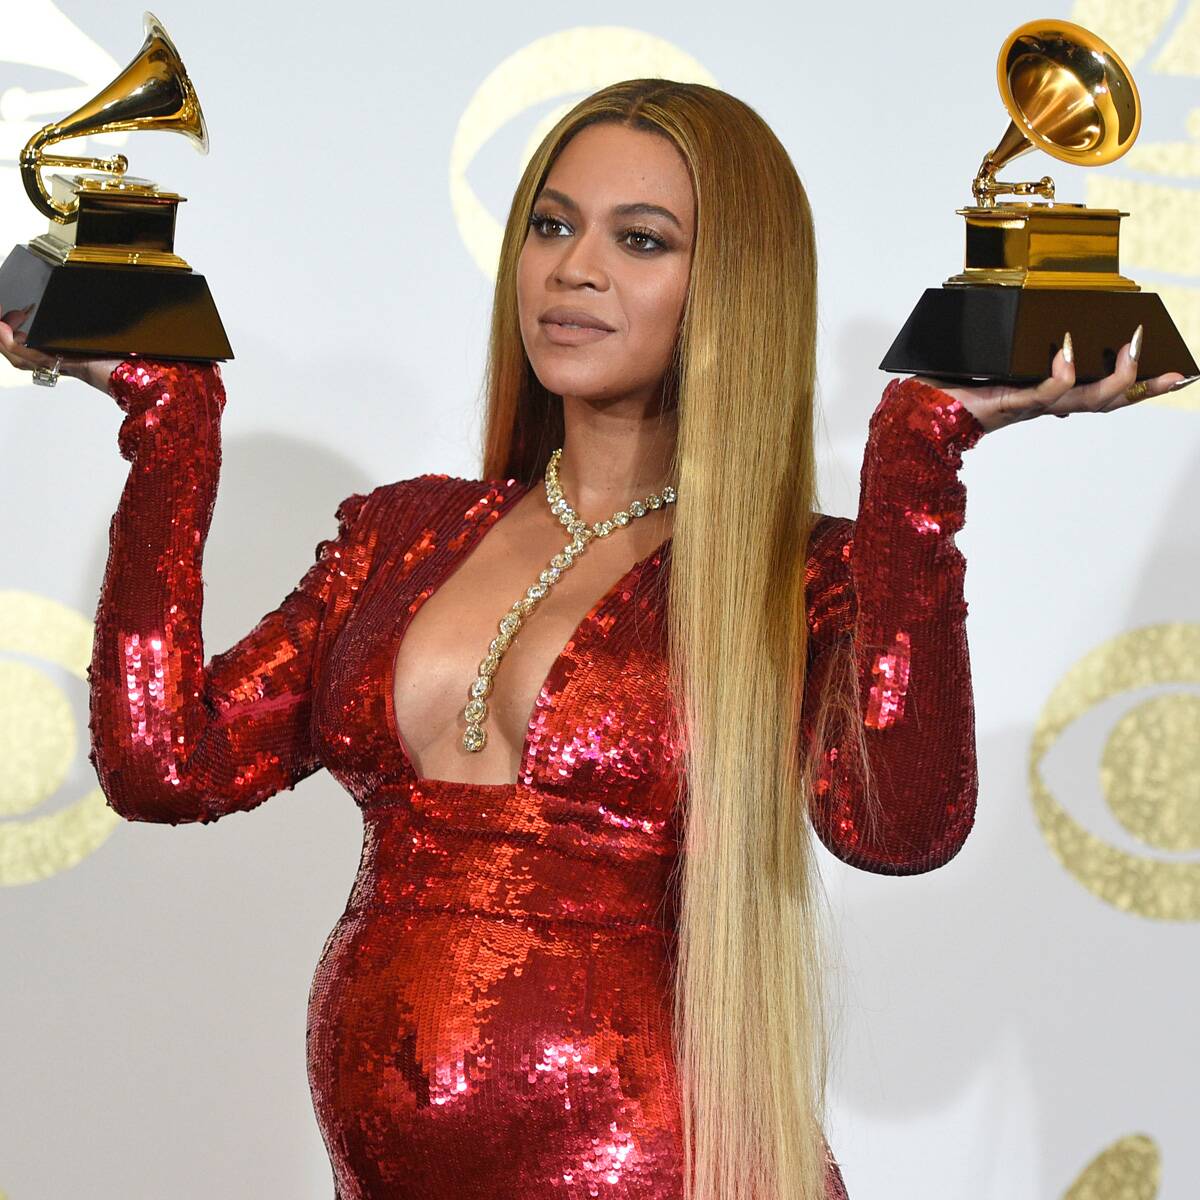 Beyoncé Chose Not to Perform at 2021 Grammys, Recording Academy CEO Says